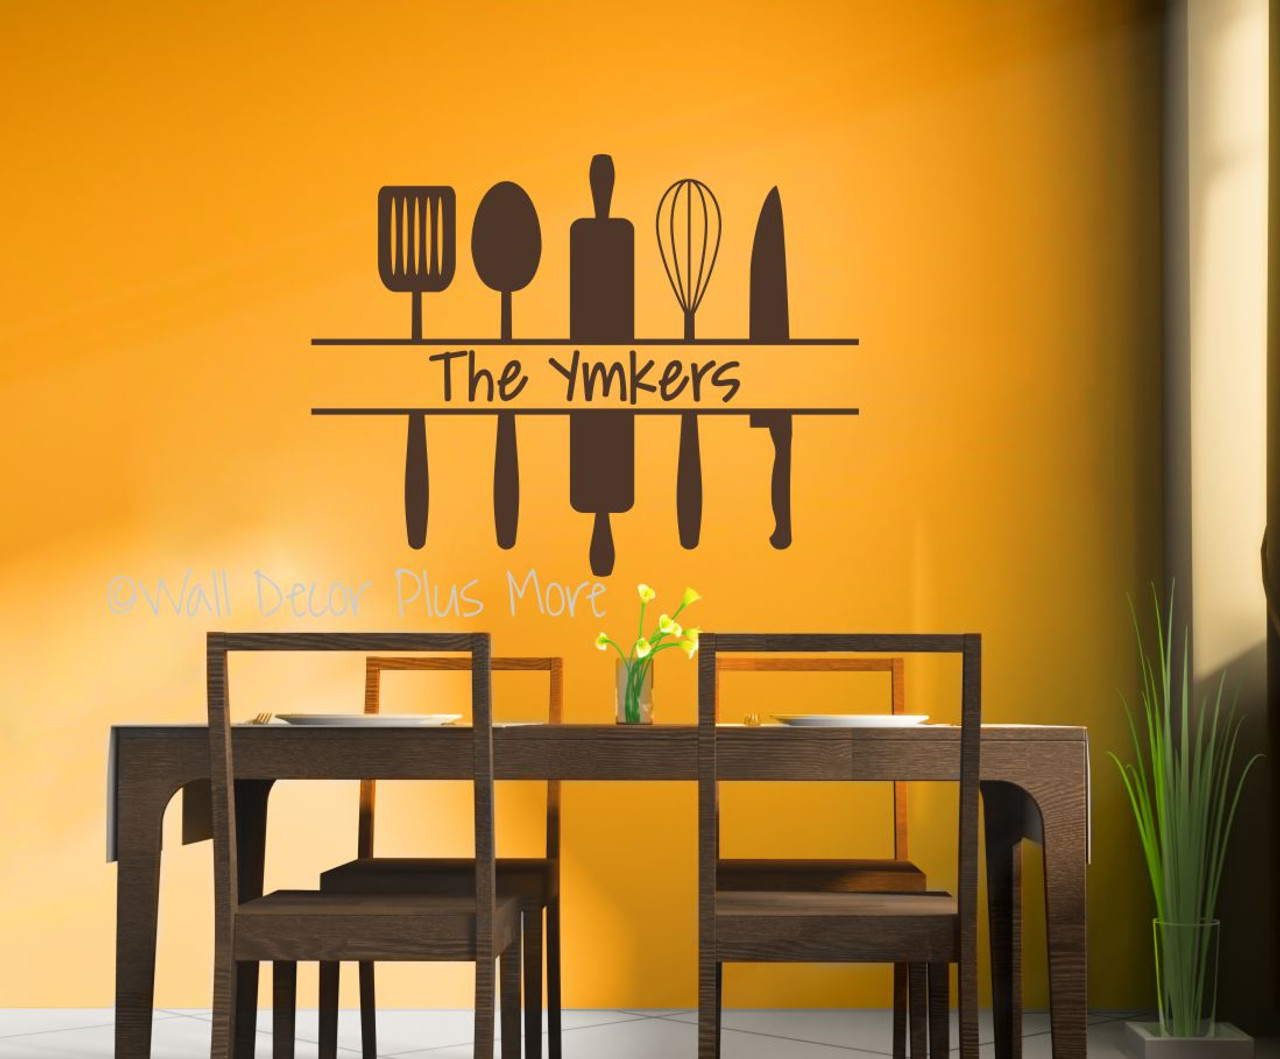 https://cdn11.bigcommerce.com/s-571px4/images/stencil/1280x1280/products/1652/5246/PS021-A_Personalized_Kitchen_Wall_Art_Decals_Vinyl_Stickers_Custom_Name_with_Utensils_Brown__43971.1541717142.jpg?c=2